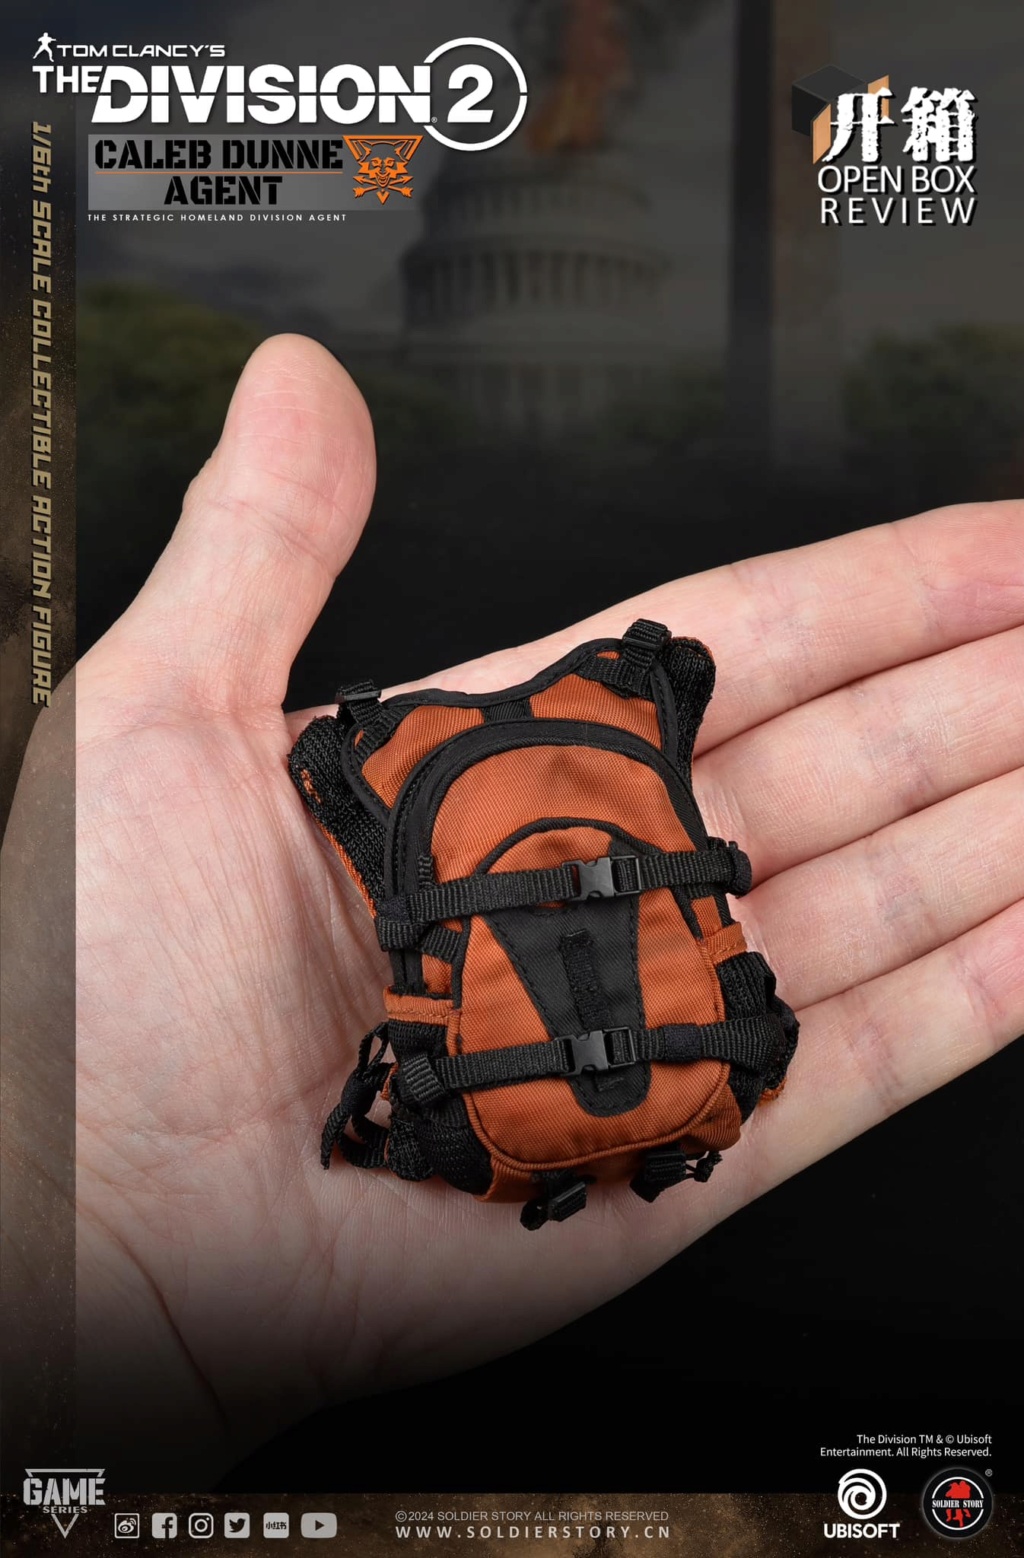 VideoGame-Based - NEW PRODUCT: SOLDIER STORY: #SSG-008 1/6 Scale The Division 2 Agent “Caleb Dunne” Soldie34